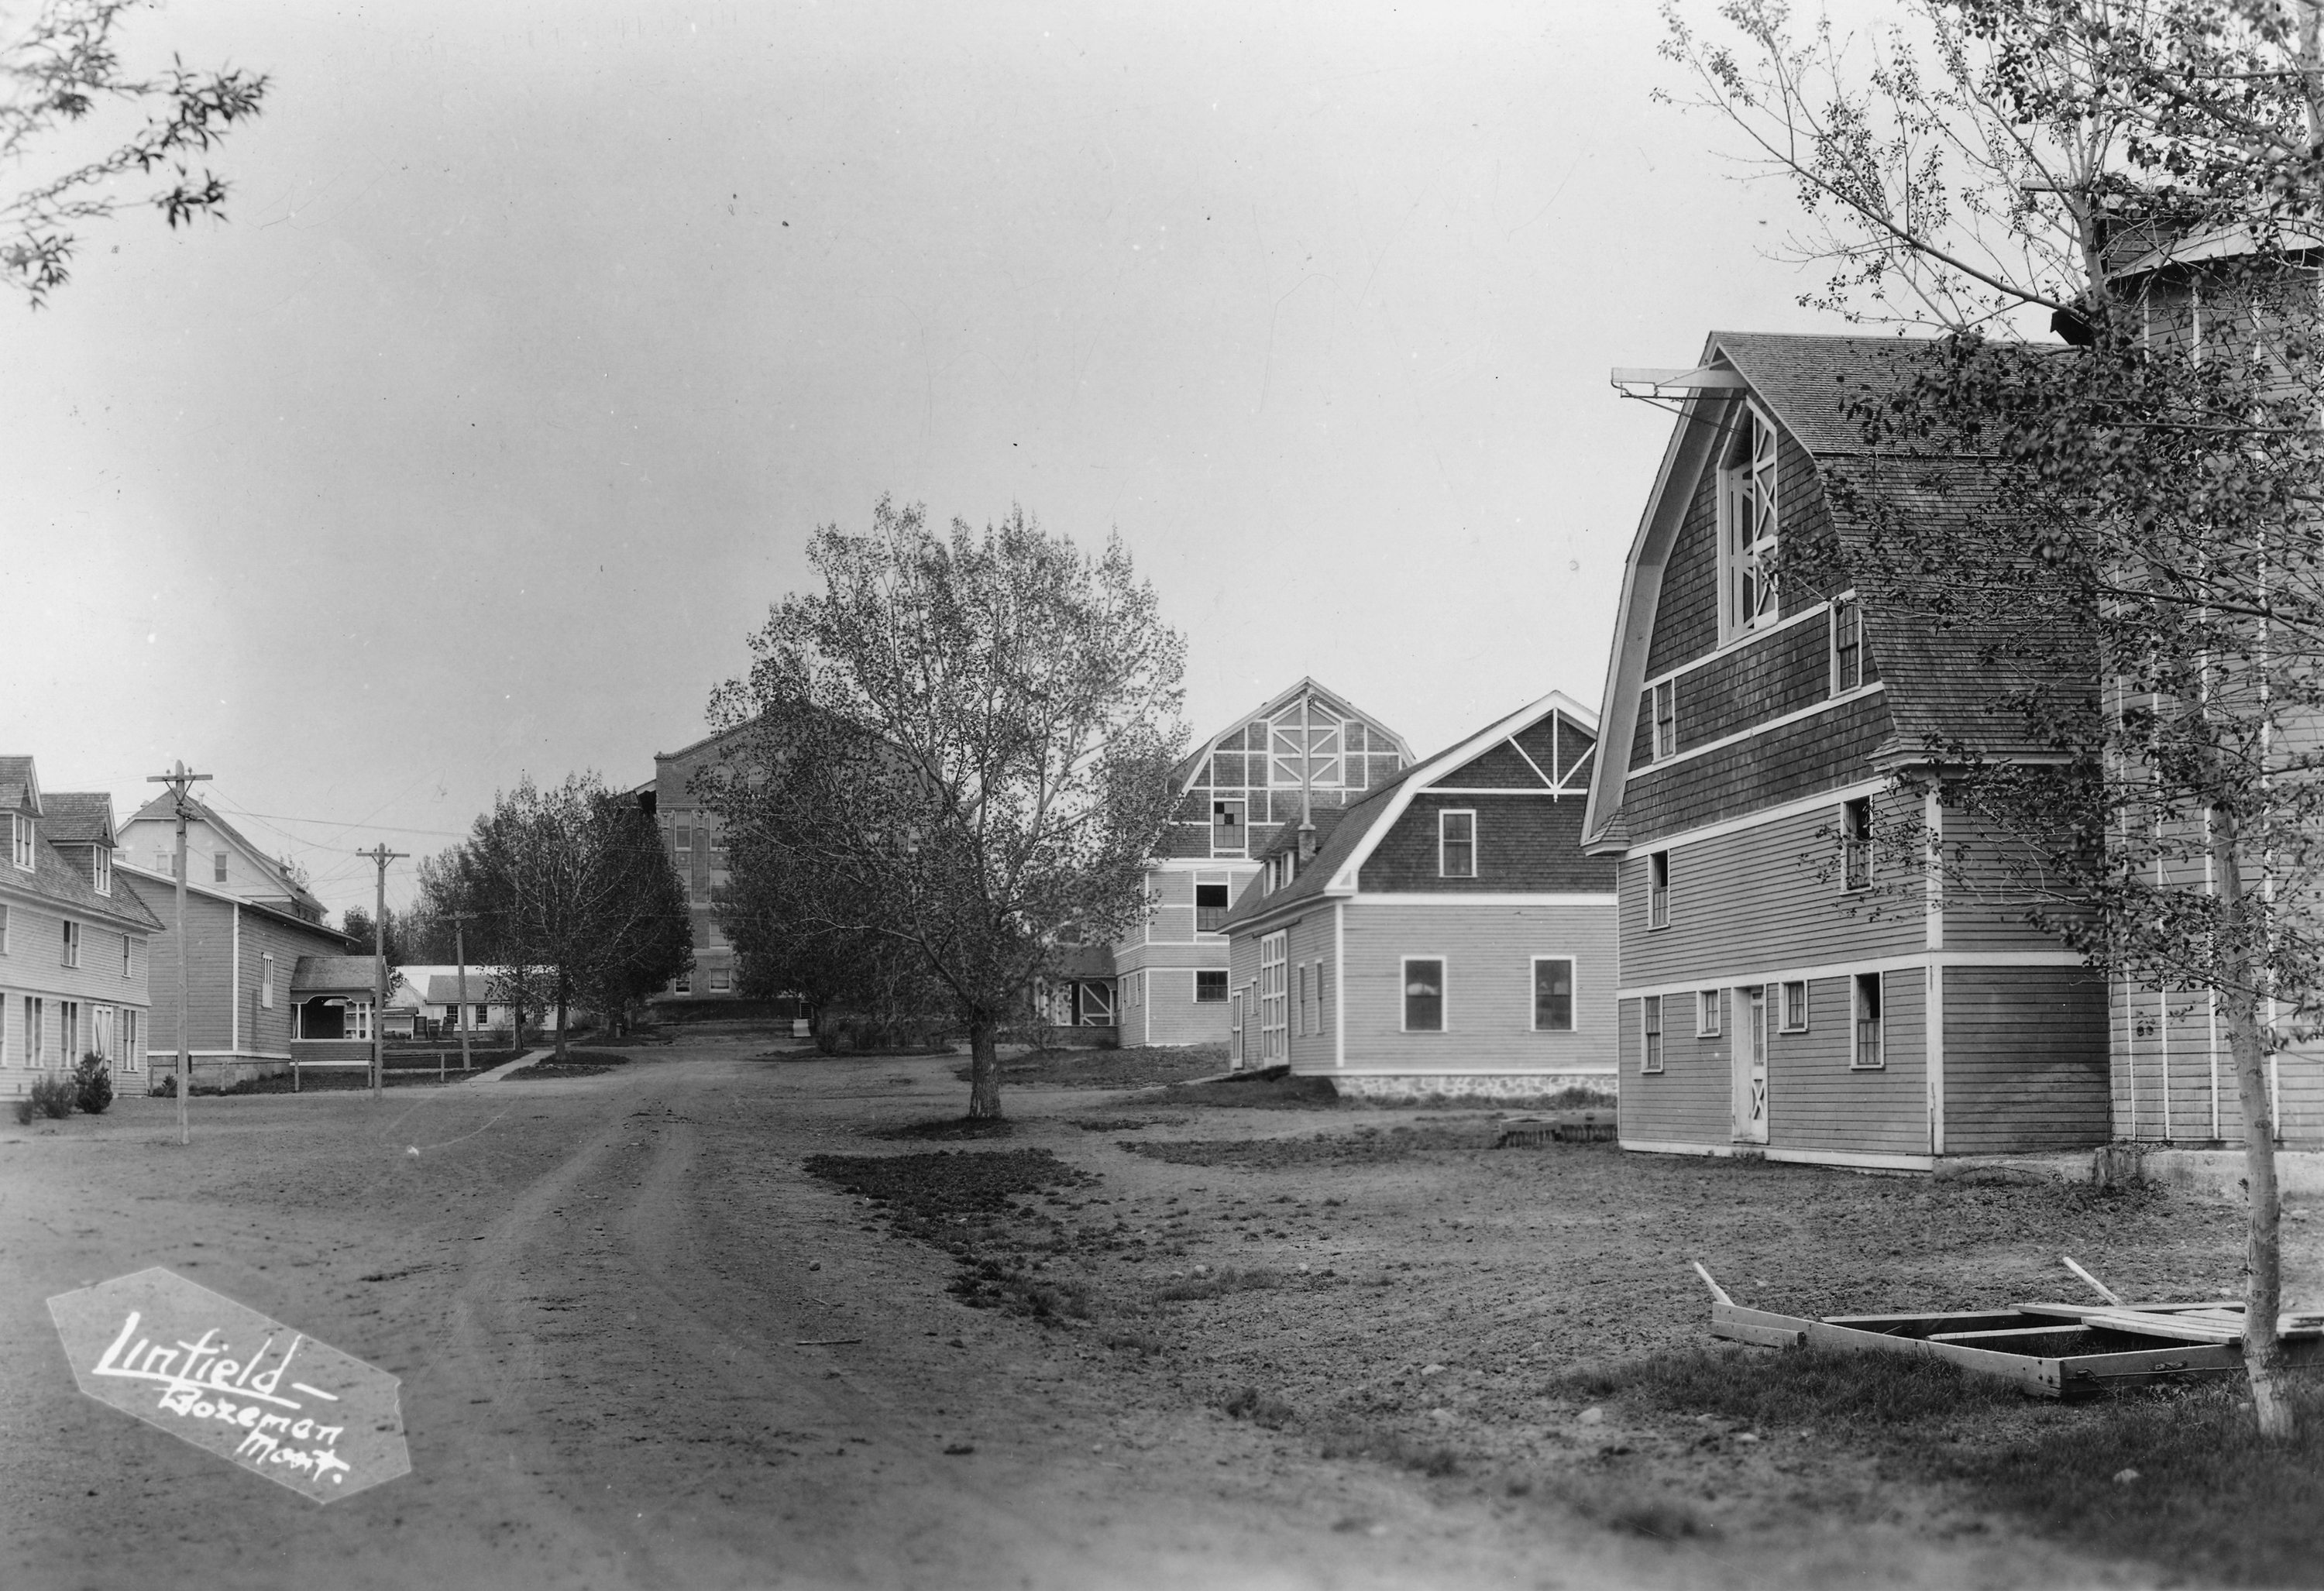 Several barns are shown lining a dirt road